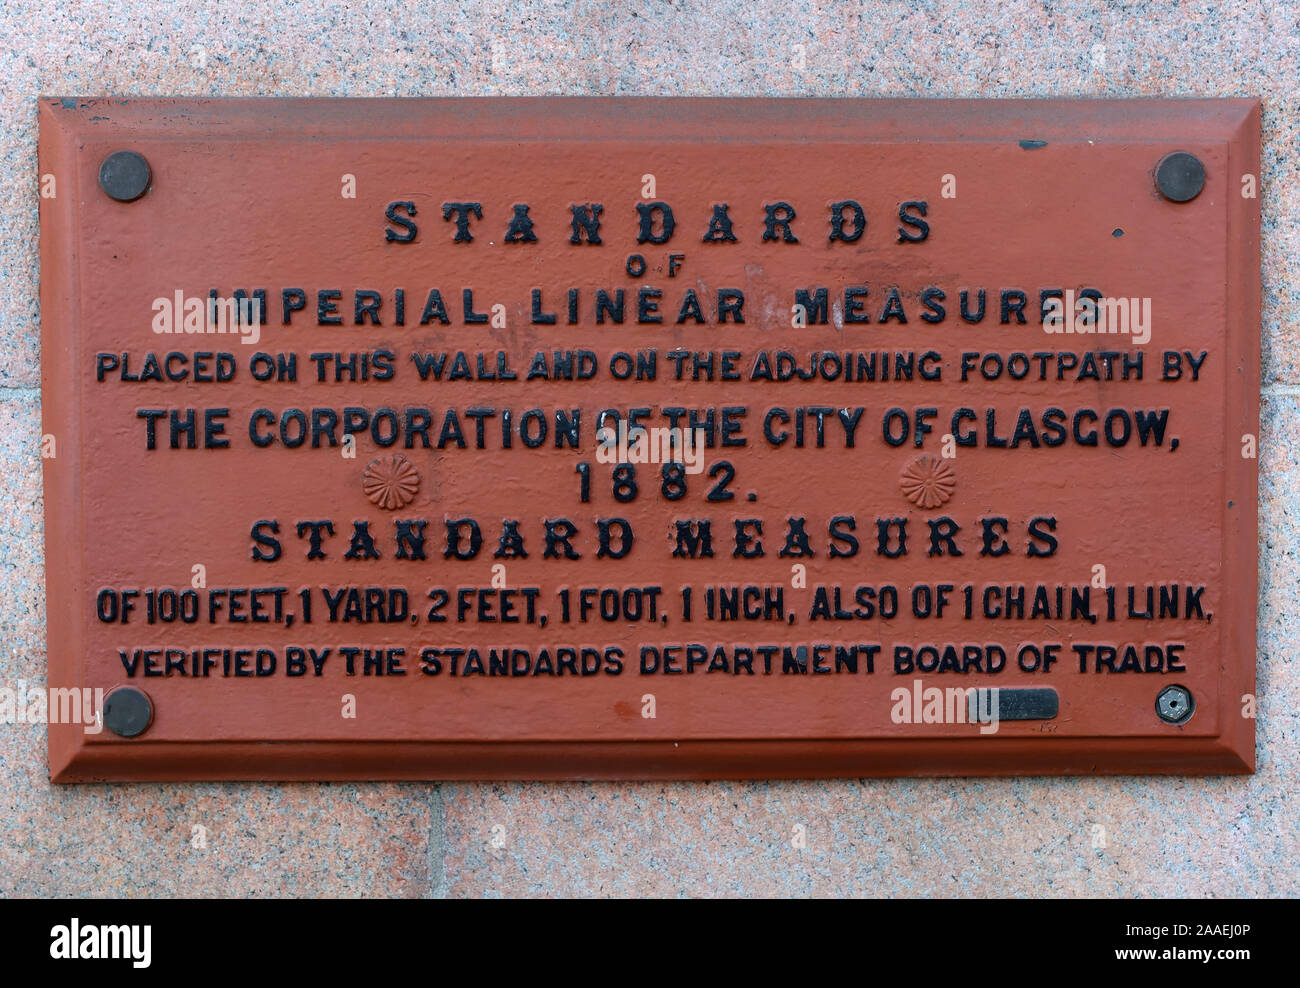 Standards of Imperial Linear Measures, Corporation of the city of Glasgow, 1882,plaque,George Square, Scotland, UK Stock Photo